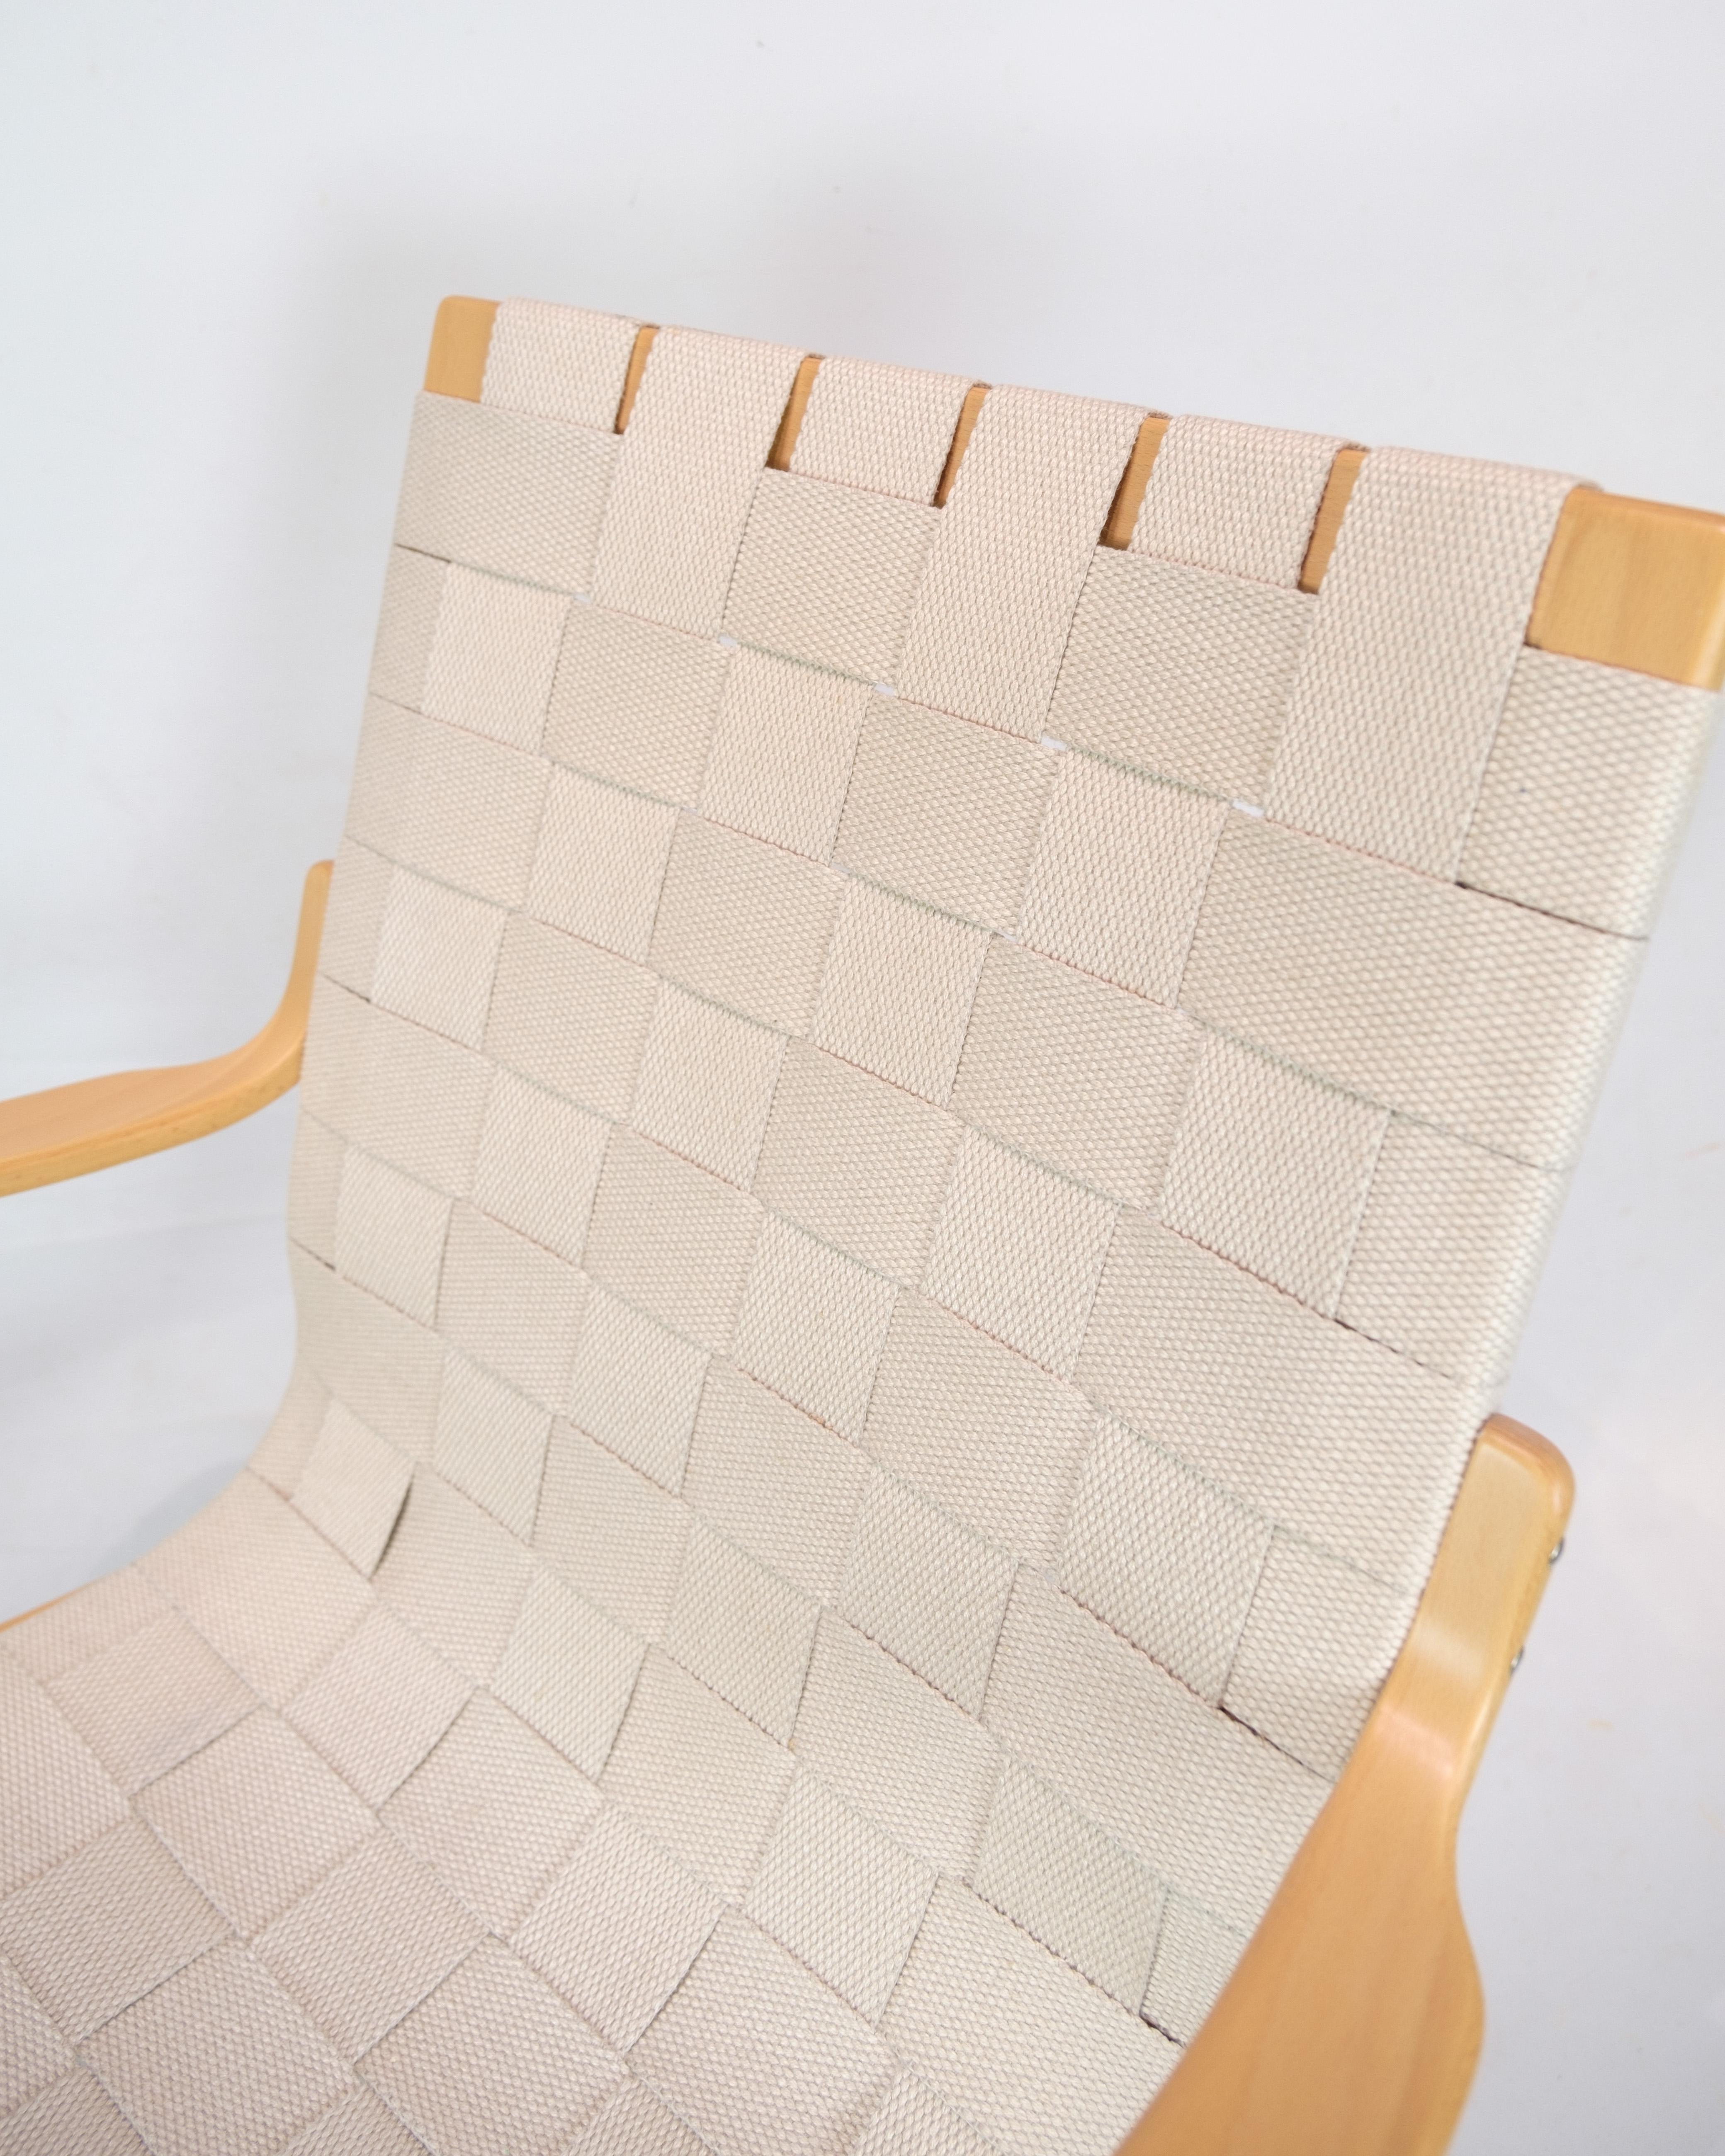 This armchair, known as Model Mina, represents an exemplary piece of furniture design created by renowned Swedish designer Bruno Mathsson. The chair is constructed from bent beech, which gives it a natural and elegant shape.

A distinctive feature